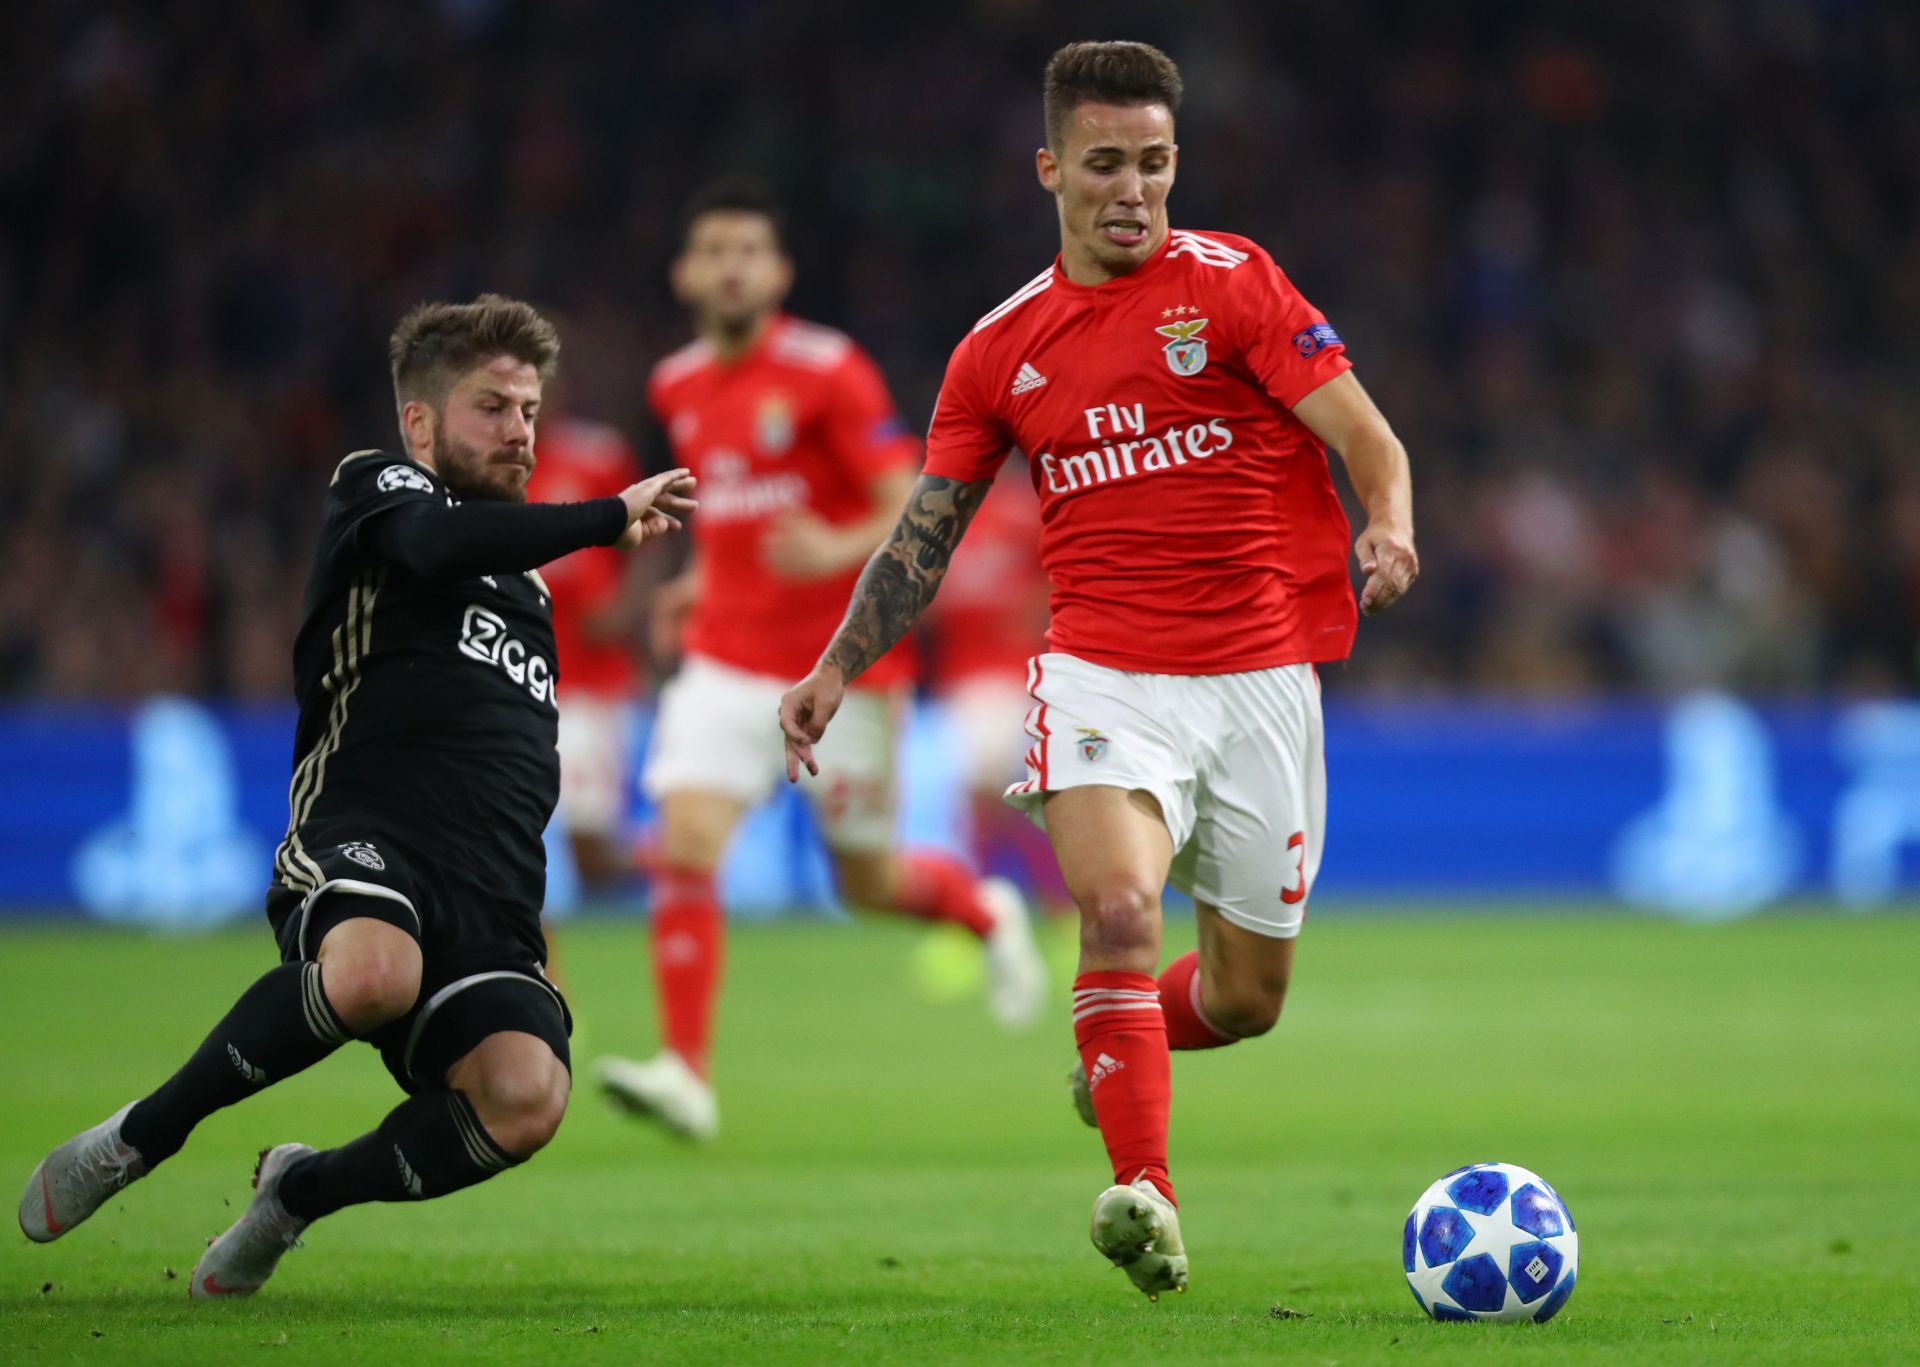 Grimaldo (R) recently dismantled his former side in the Champions League